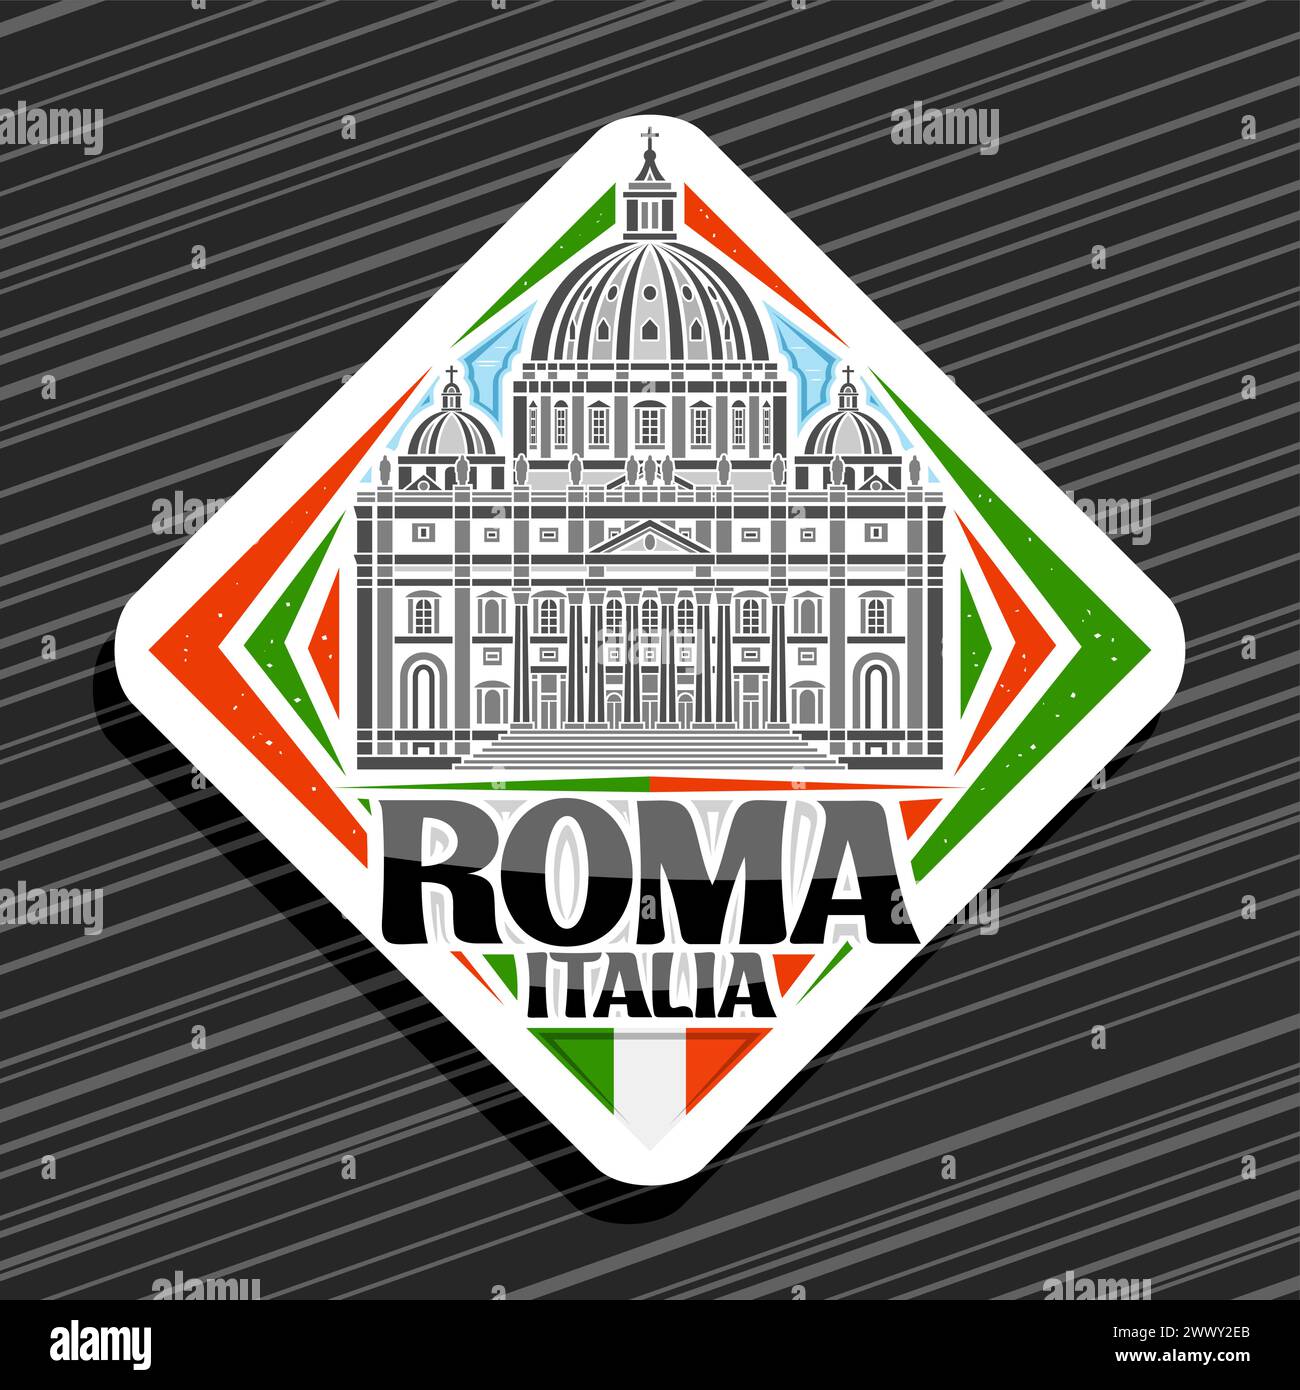 Vector logo for Roma, white rhomb road sign with line illustration of famous majestic roma Peter's basilica on day sky background, decorative urban re Stock Vector